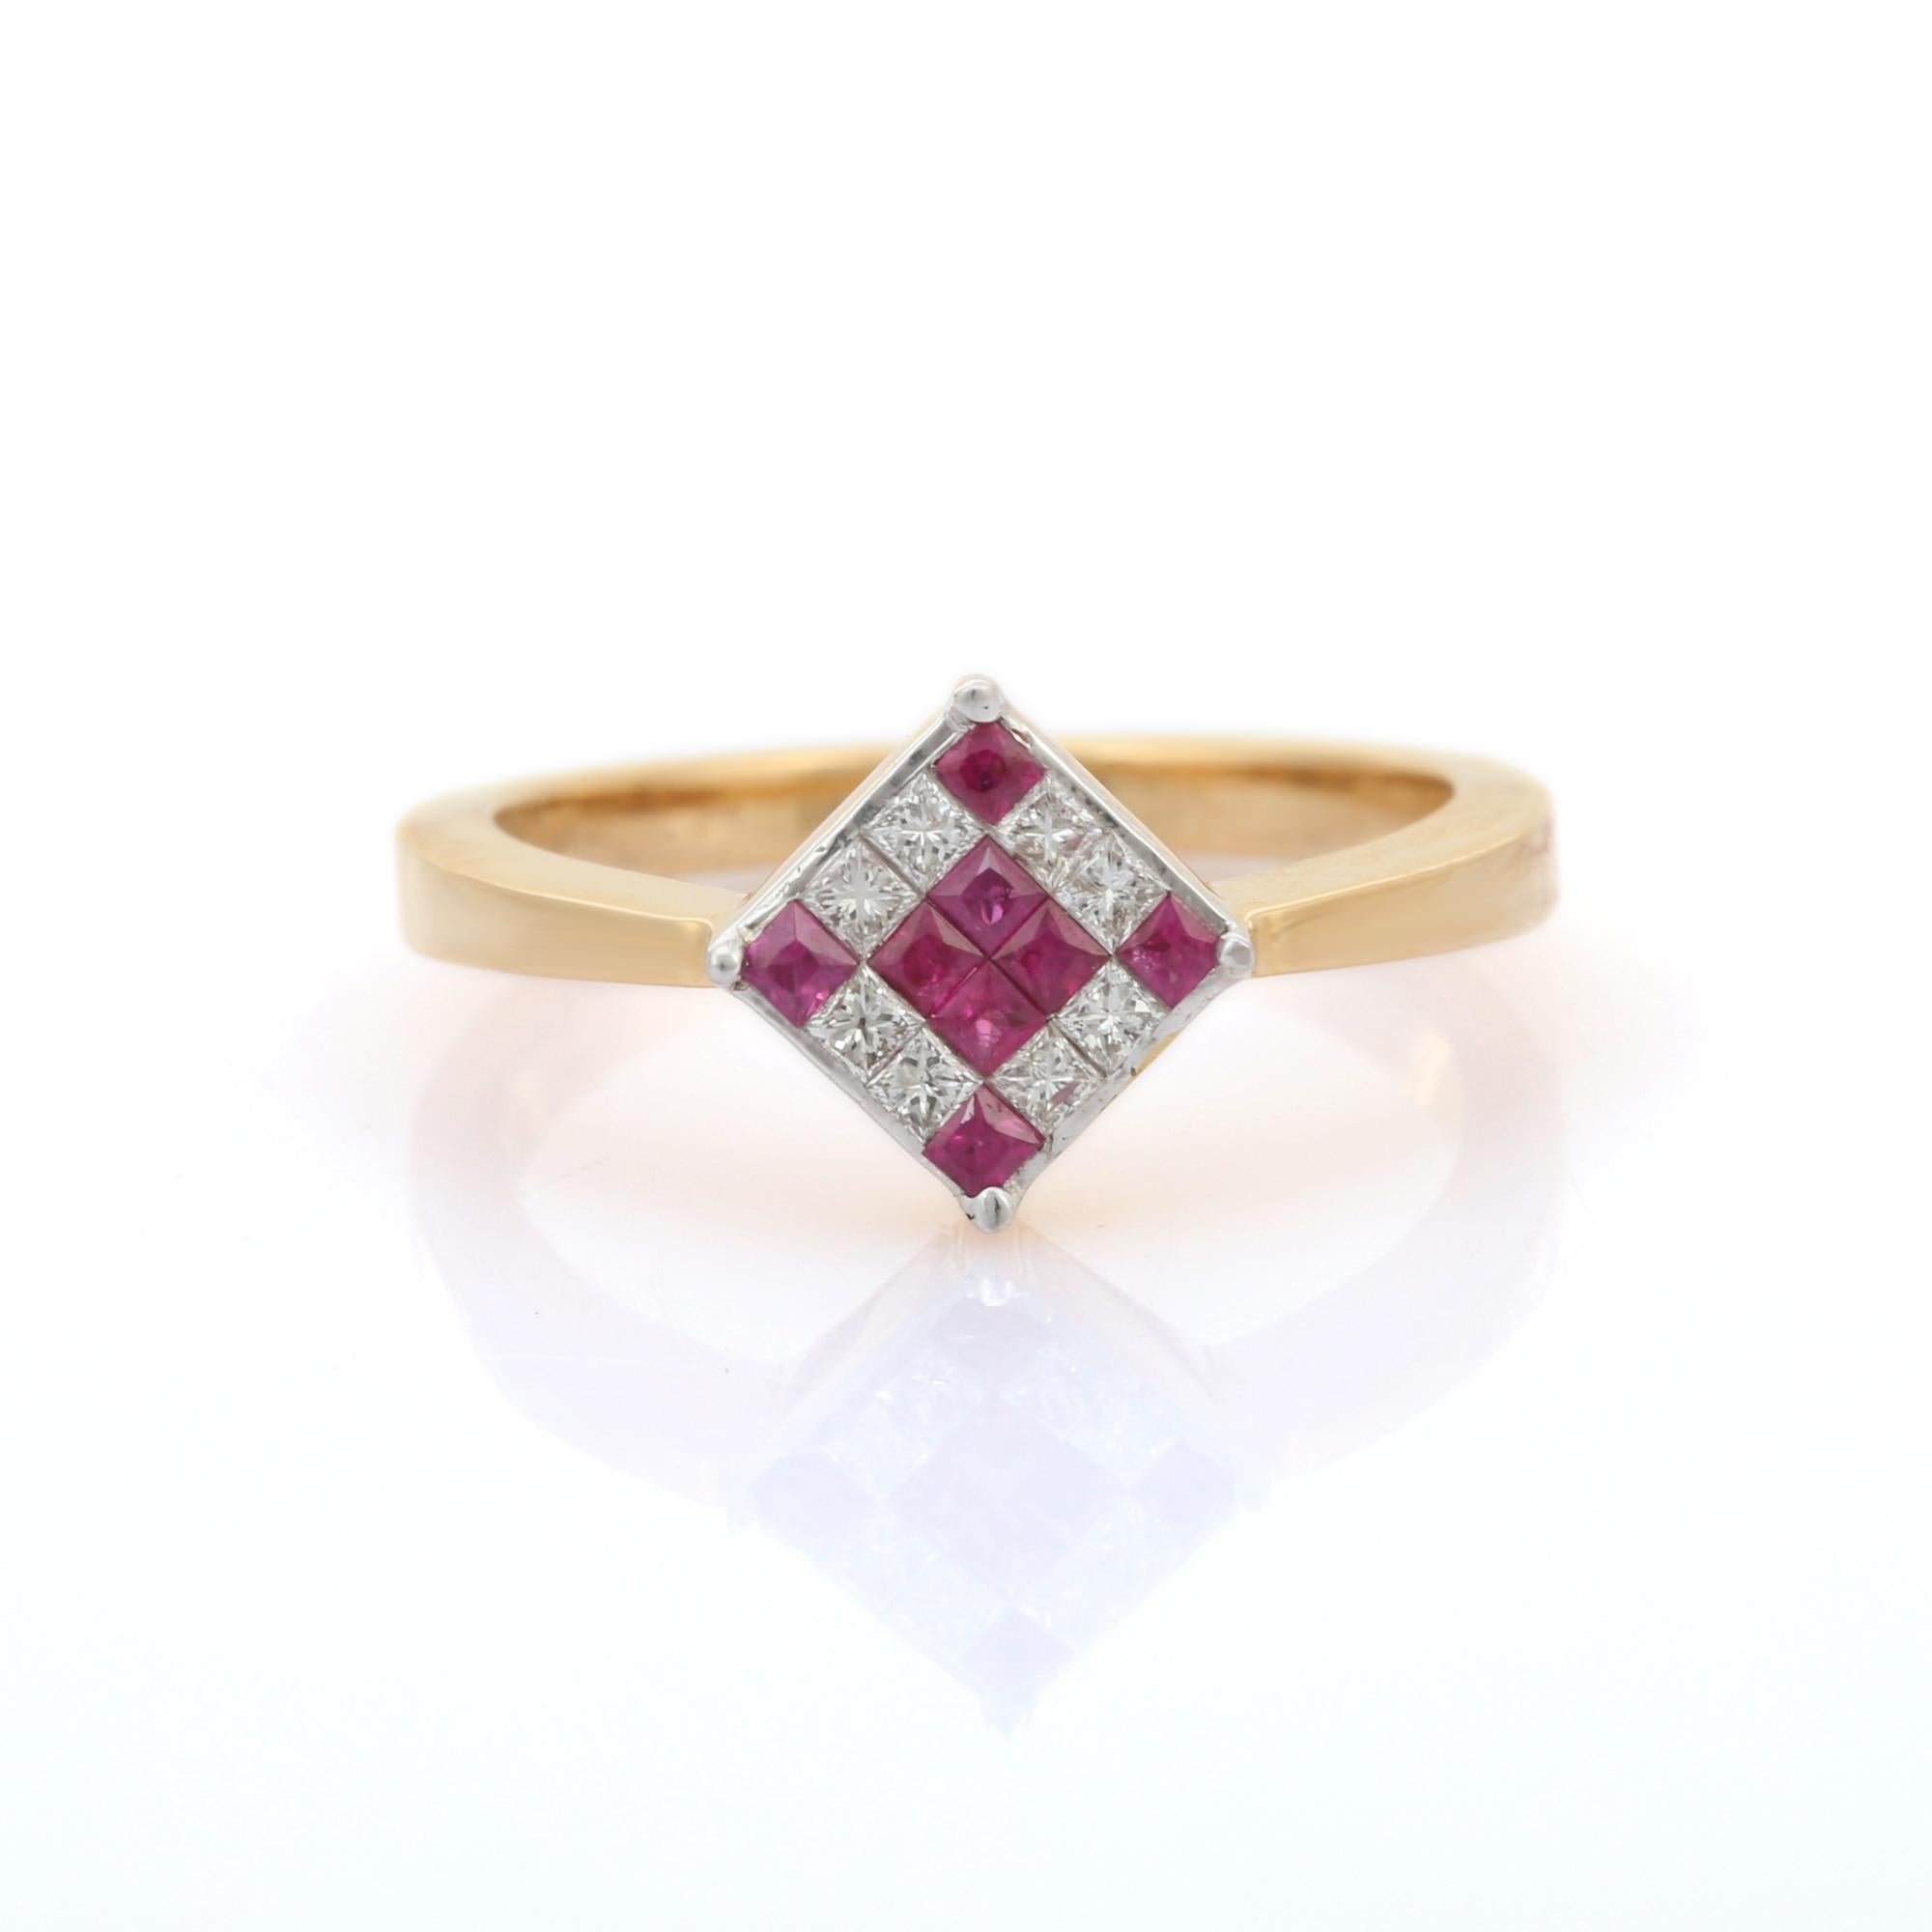 For Sale:  Minimal Mosaic Diamond Ruby Square Stacking Ring in 18K Yellow Gold Settings 2